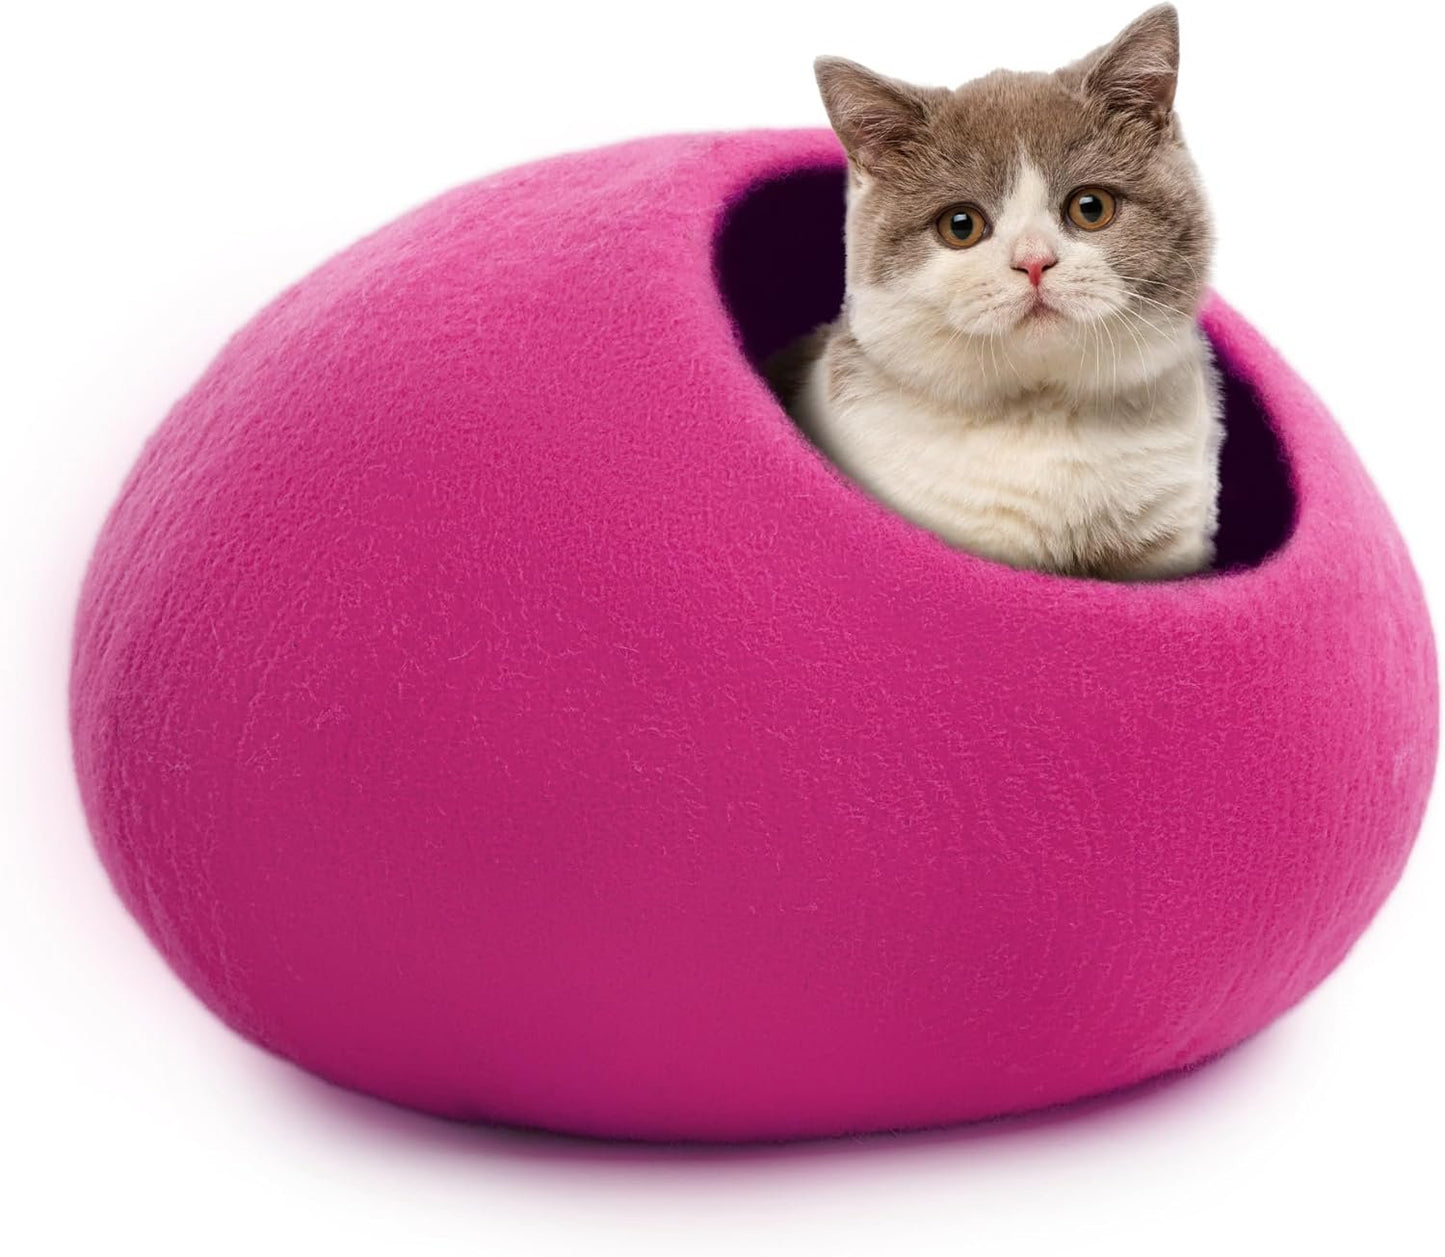 Woolygon Premium Wool Cat Cave Bed - Felt Cat Cave Handmade from 100% Merino Wool, Eco-Friendly Felt Cat Bed for Indoor Cats and Kittens